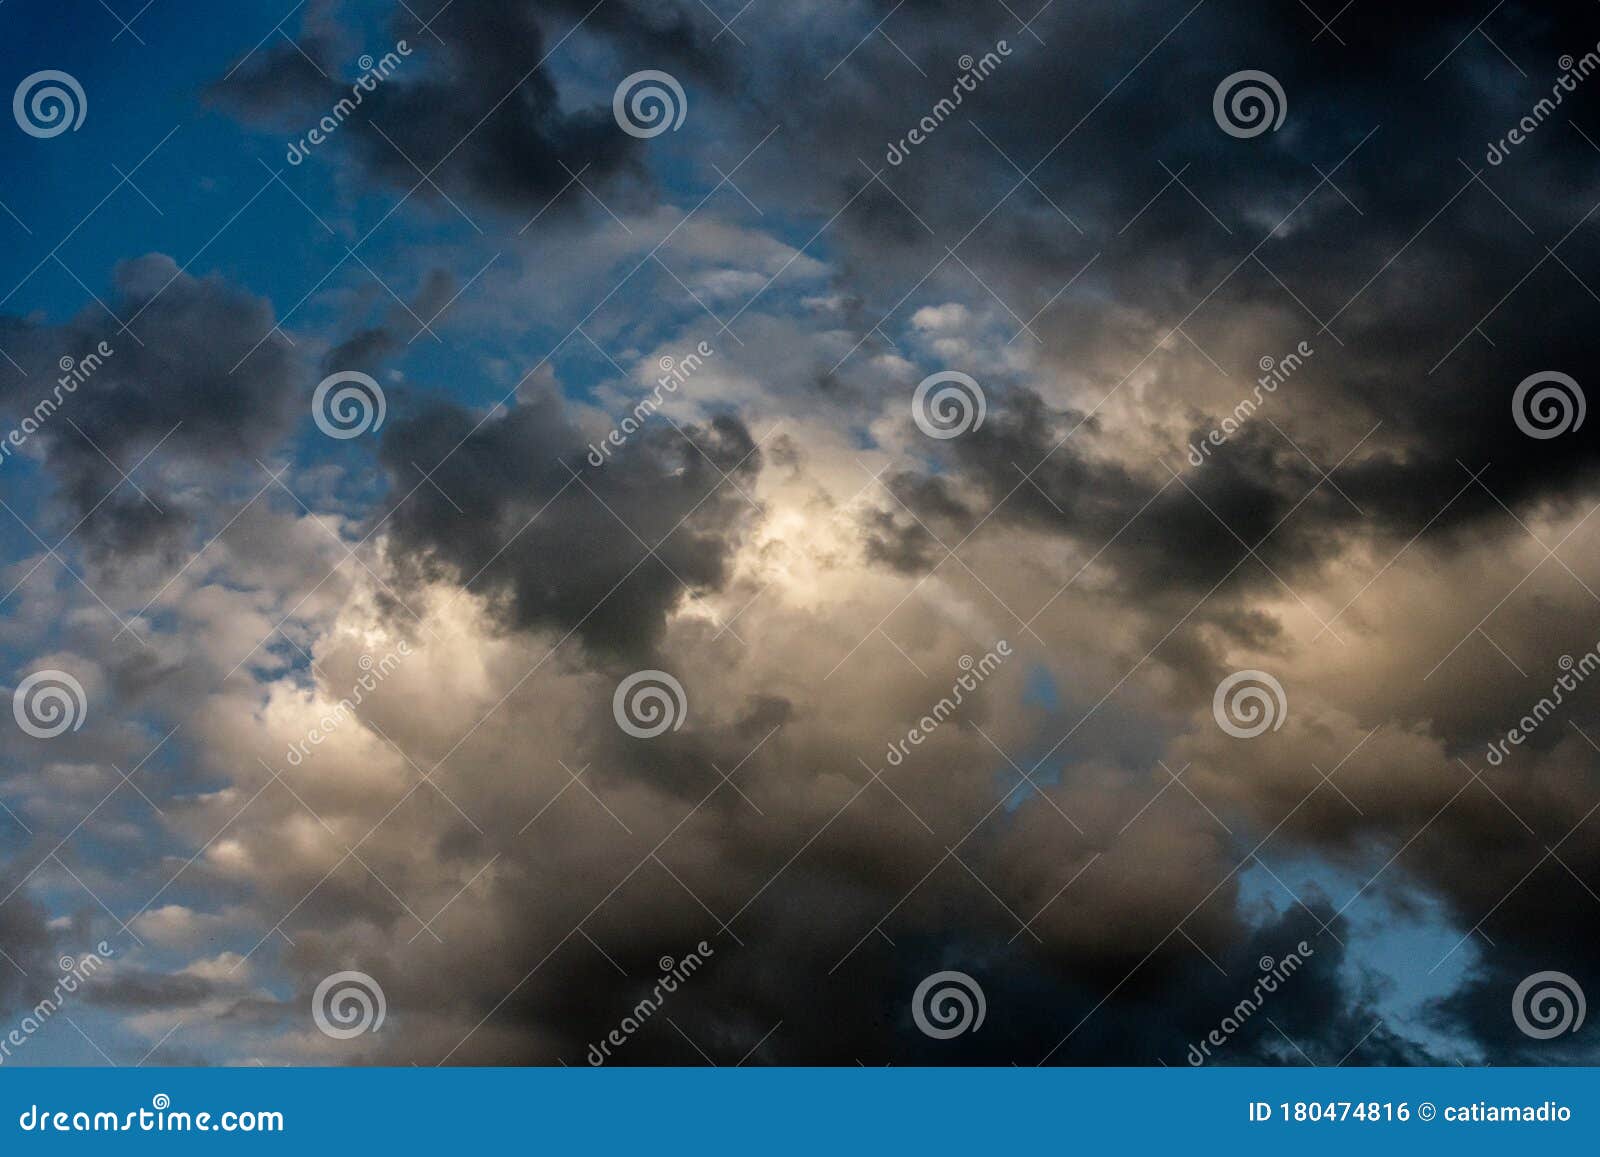 towering clouds with lights and shadows